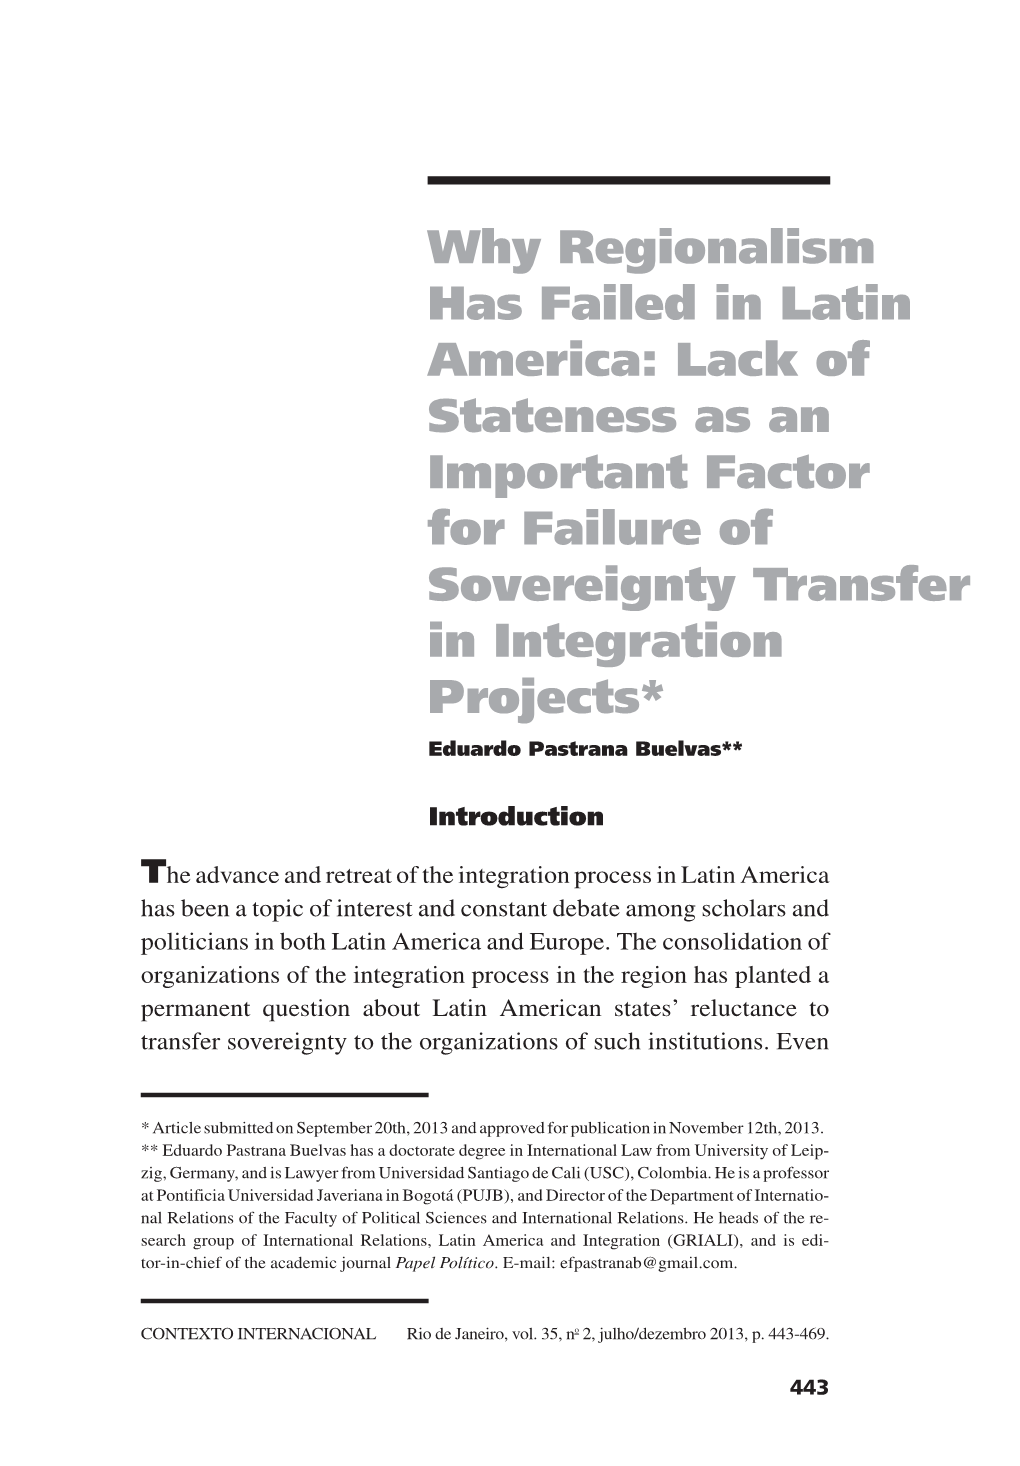 Why Regionalism Has Failed in Latin America: Lack of Stateness As An